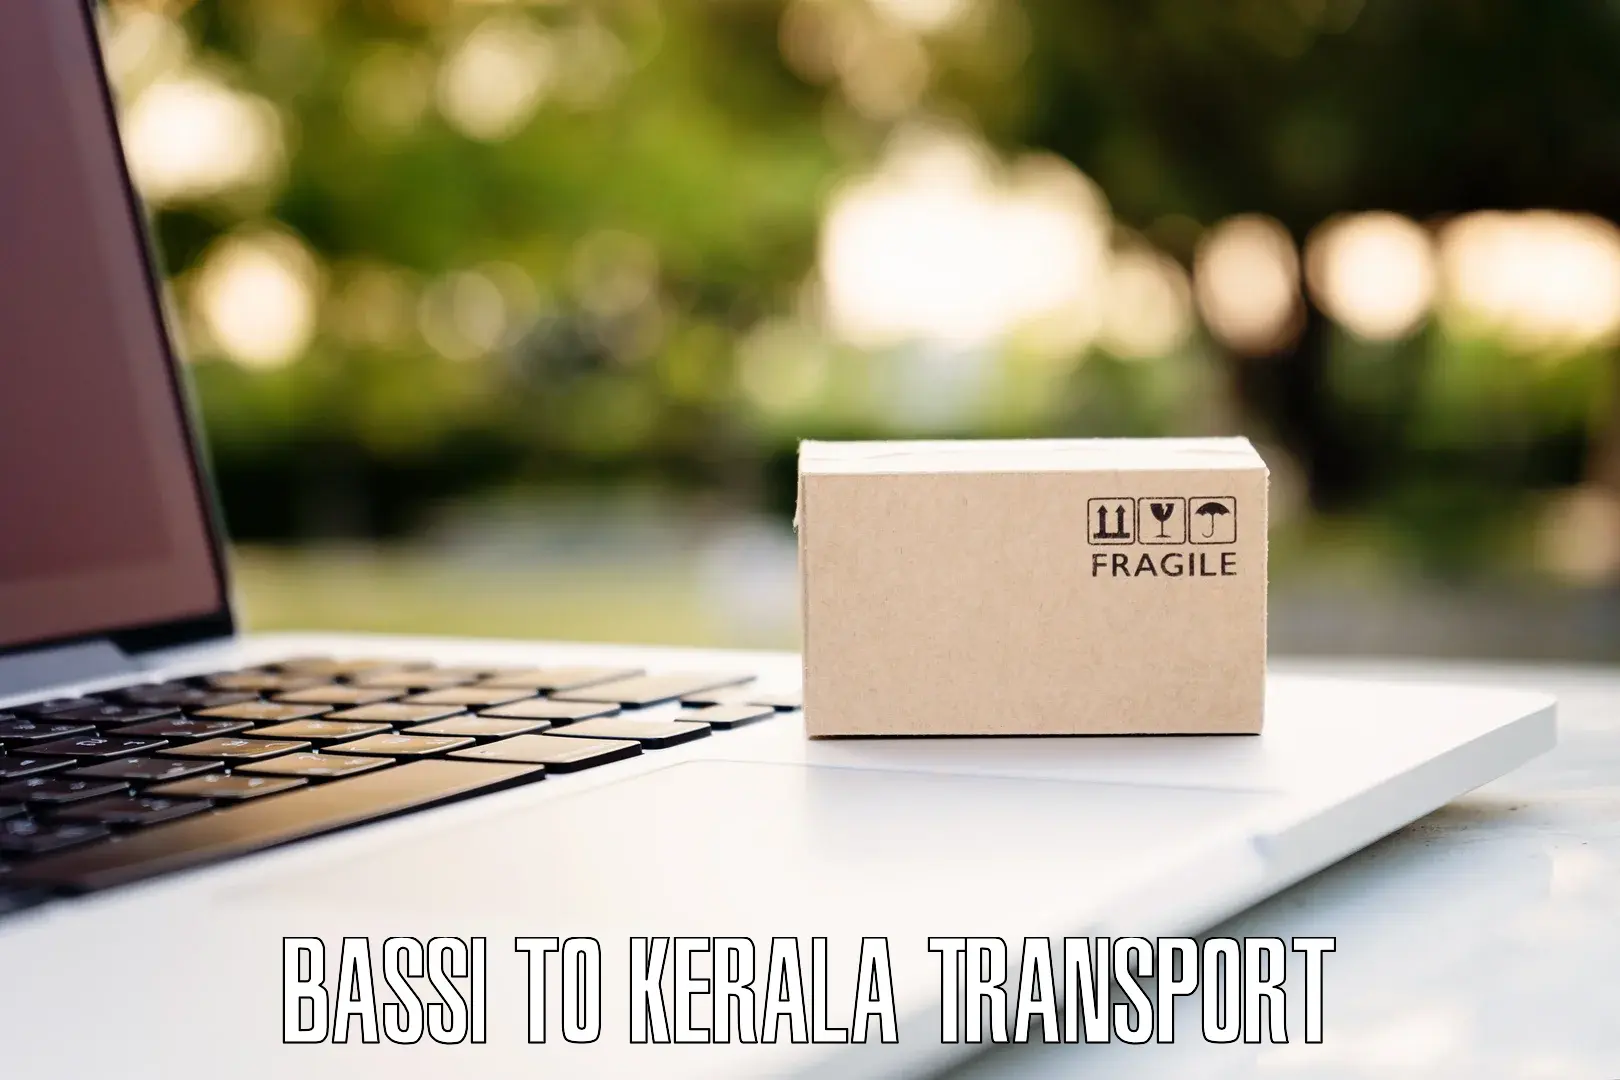 Nearby transport service Bassi to Kerala